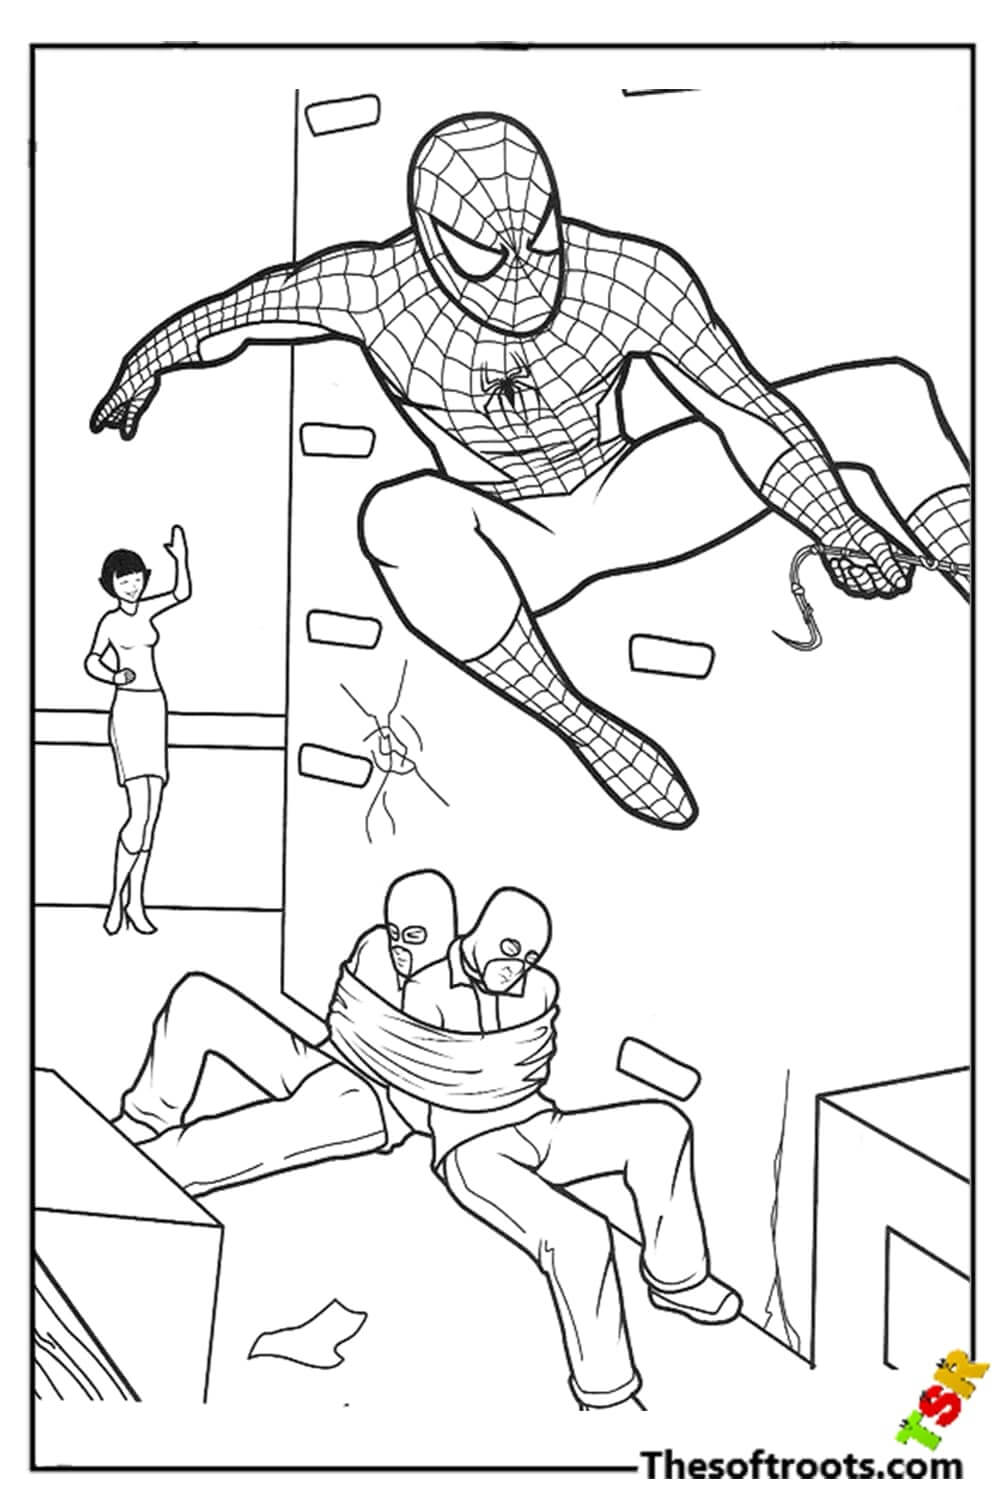 Spiderman saves the girl coloring pages